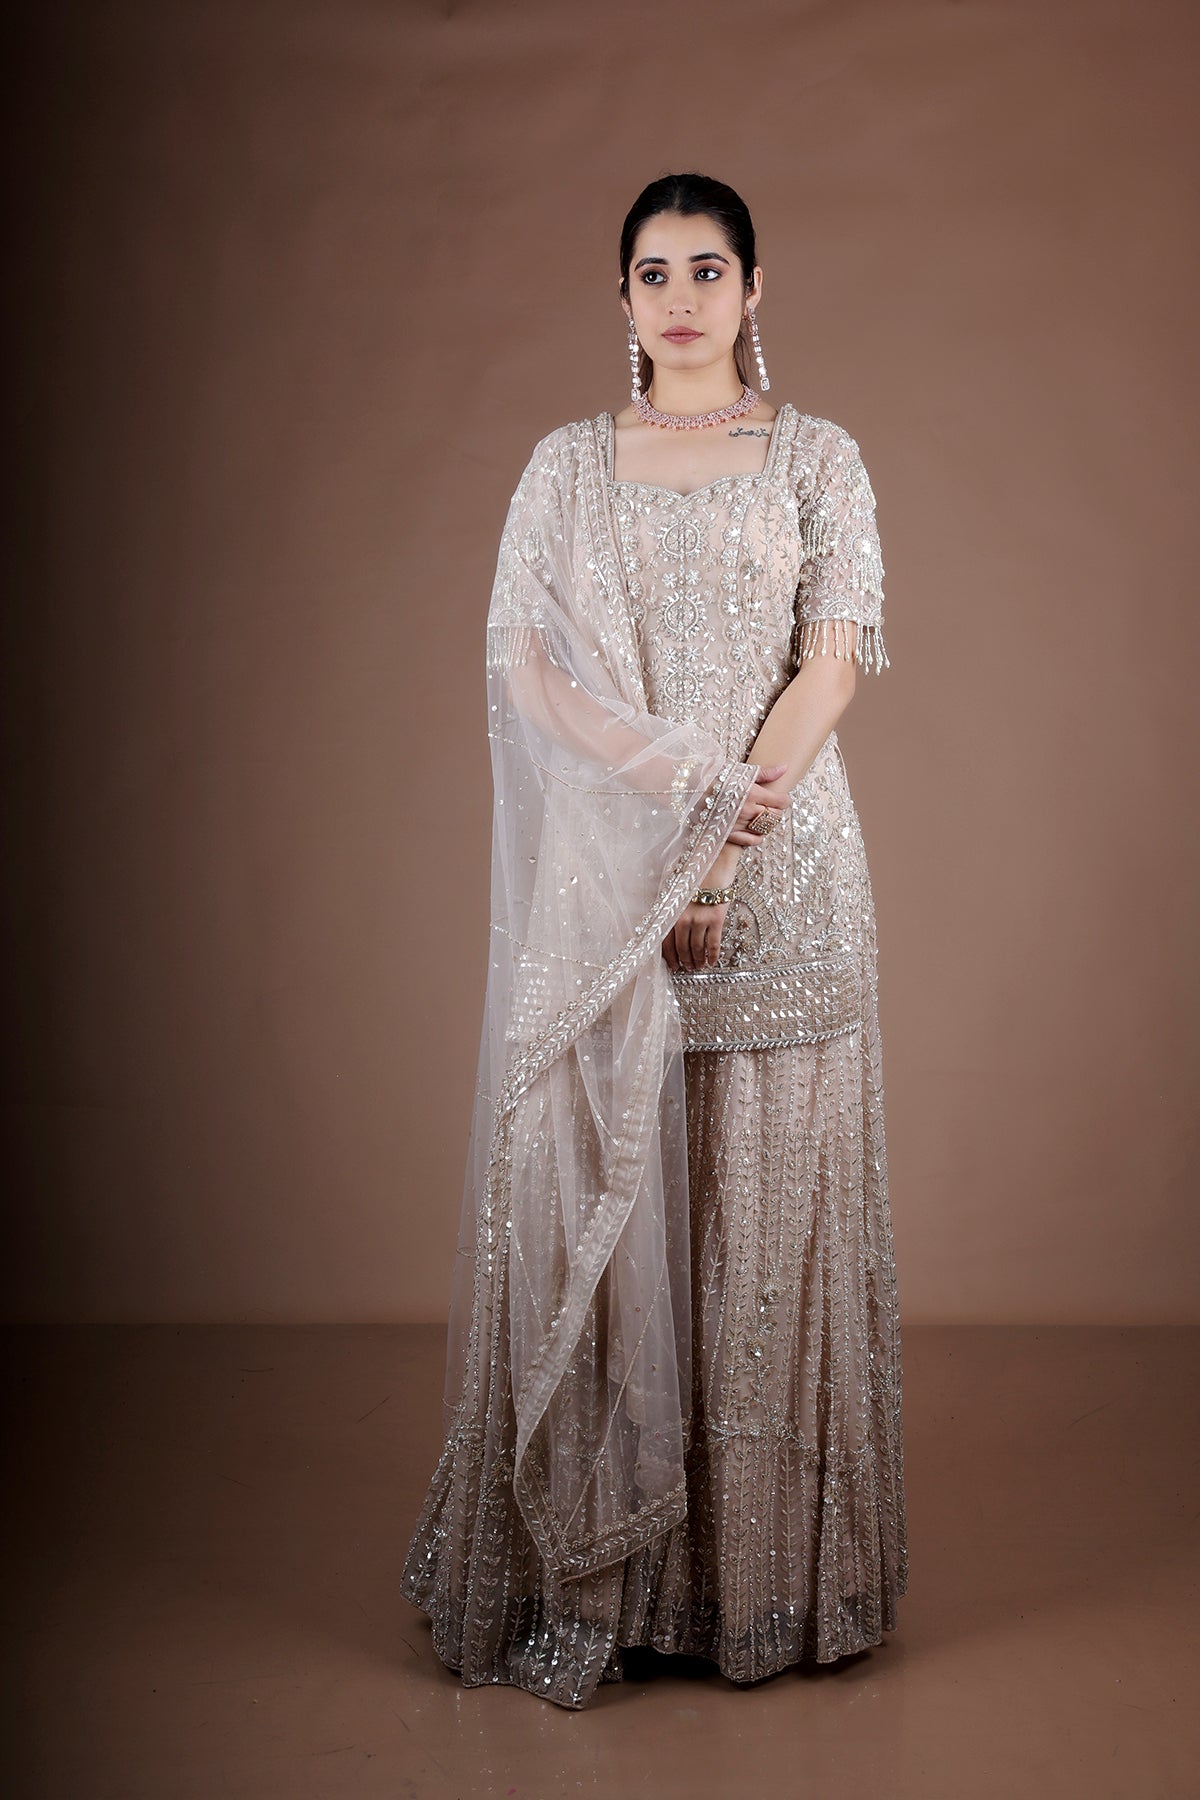 Peach Sharara suit adorned with hand embroidery